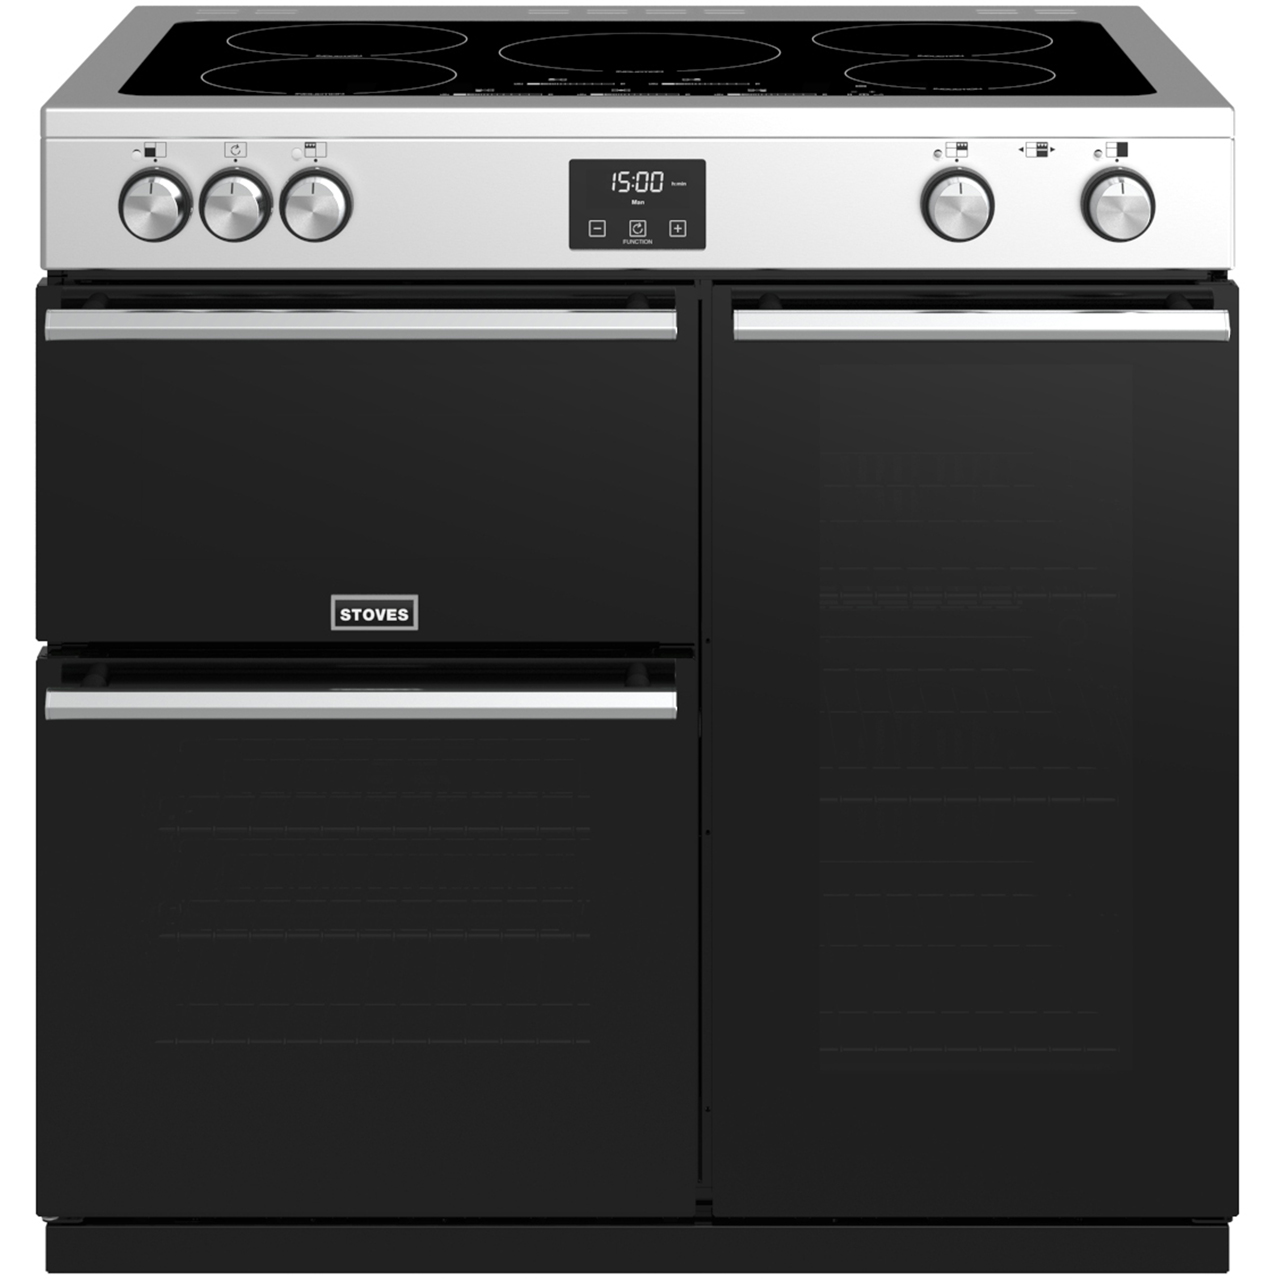 Stoves Precision DX S900Ei 90cm Electric Range Cooker with Induction Hob Review